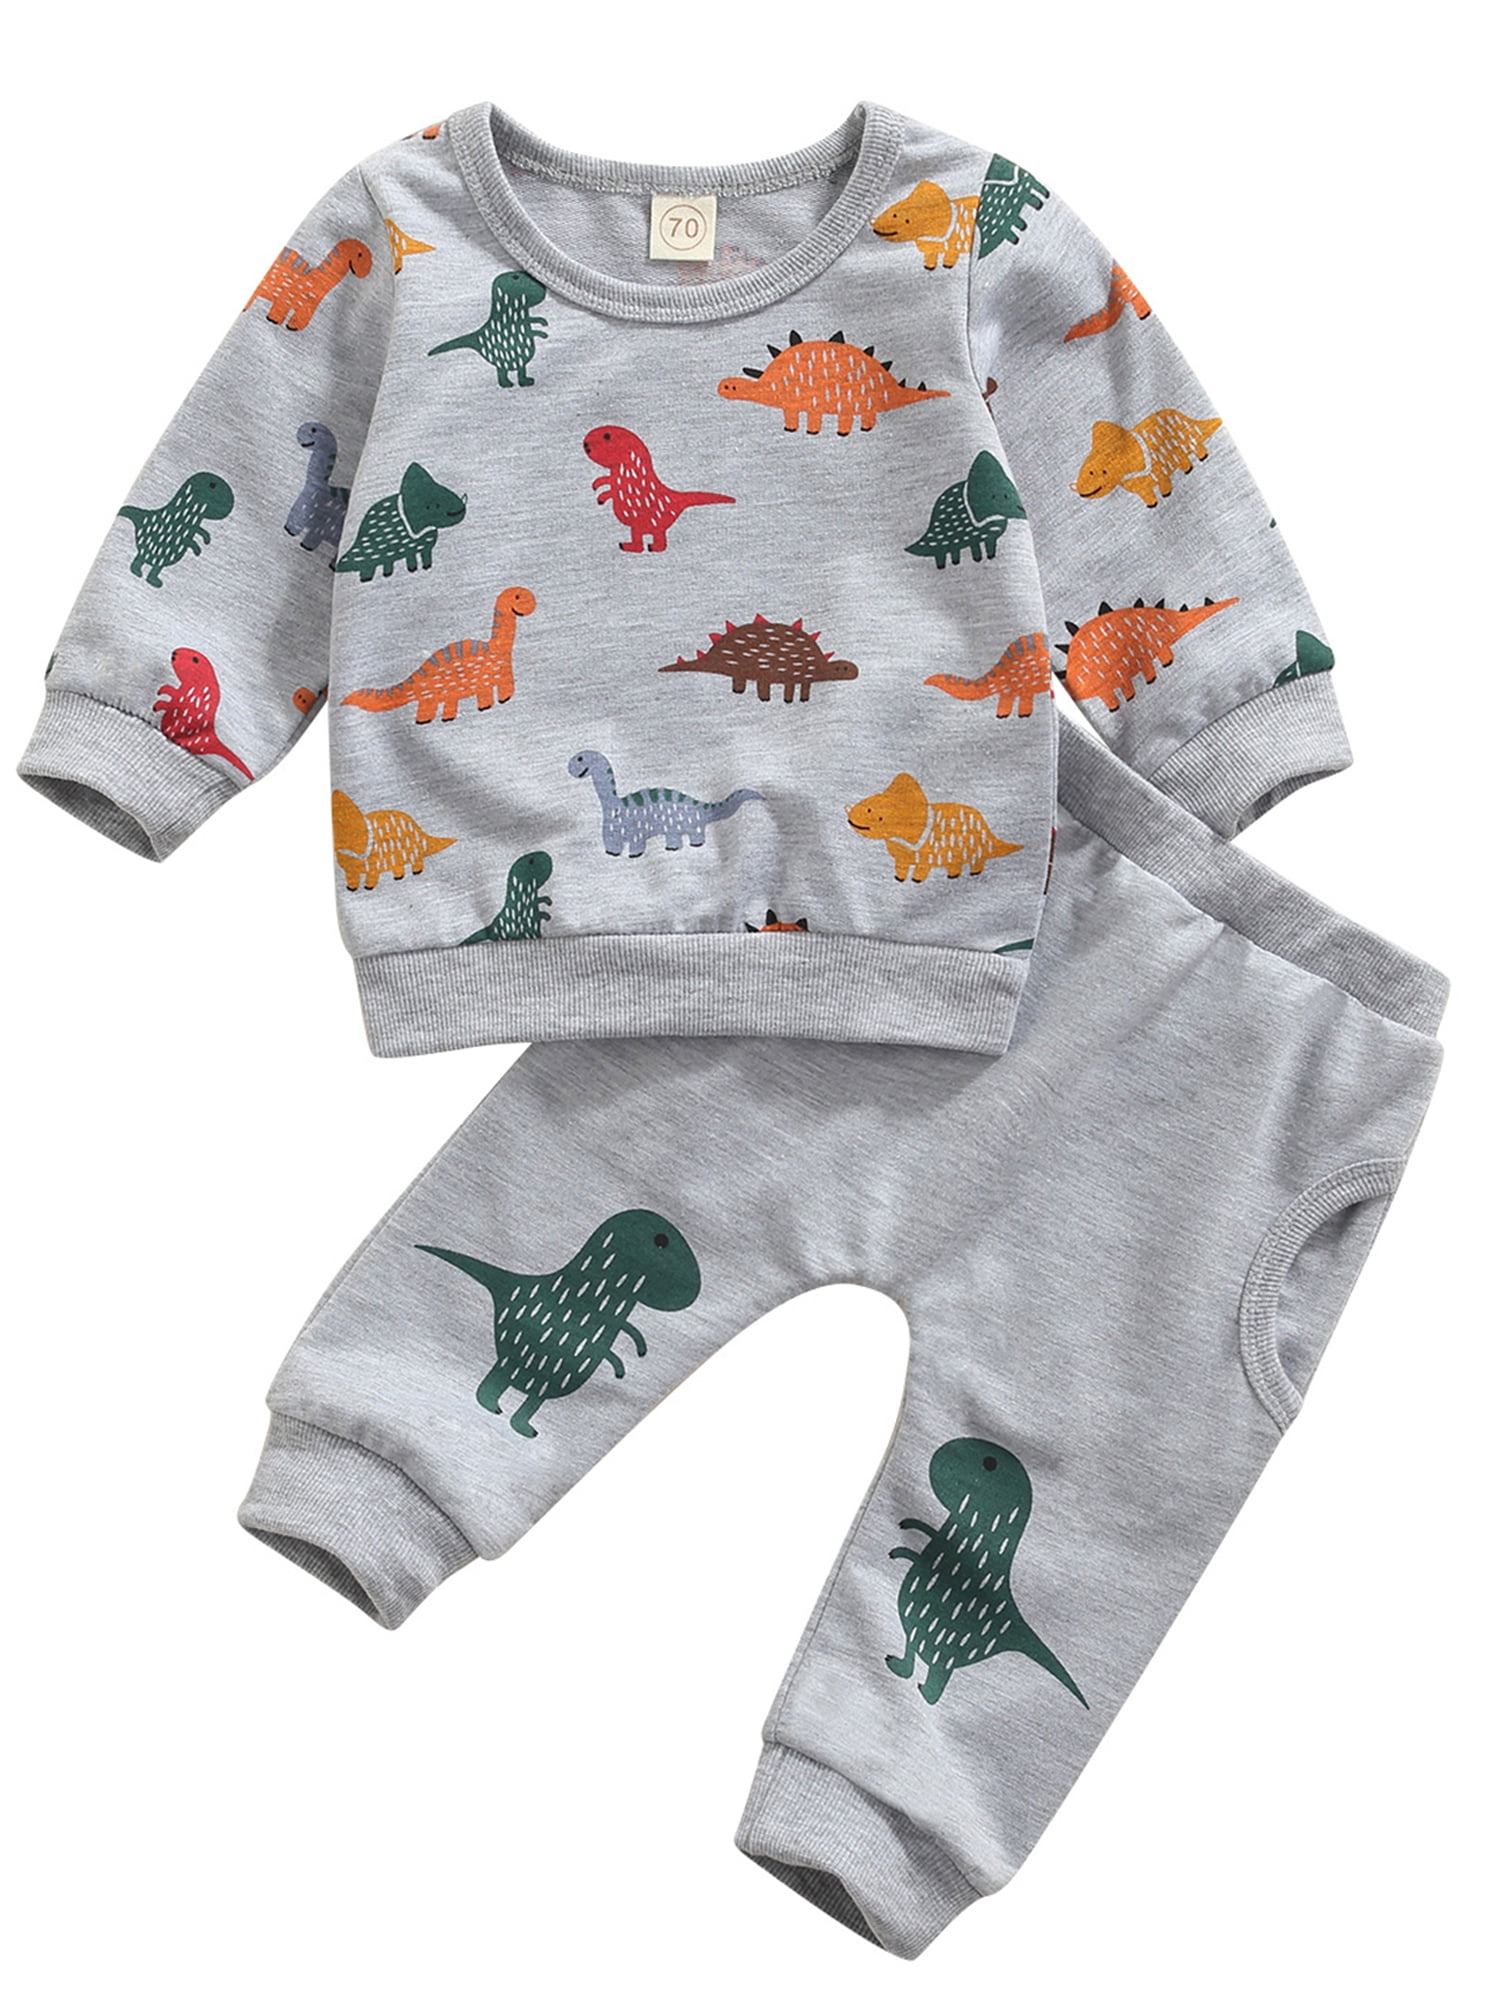 Dinosaur Outfit Infant Toddler Baby Boys Girls Clothes Cute Cartoon Dinosaur Print Tops T Shirt Pants Outfits Set 0-2 T 